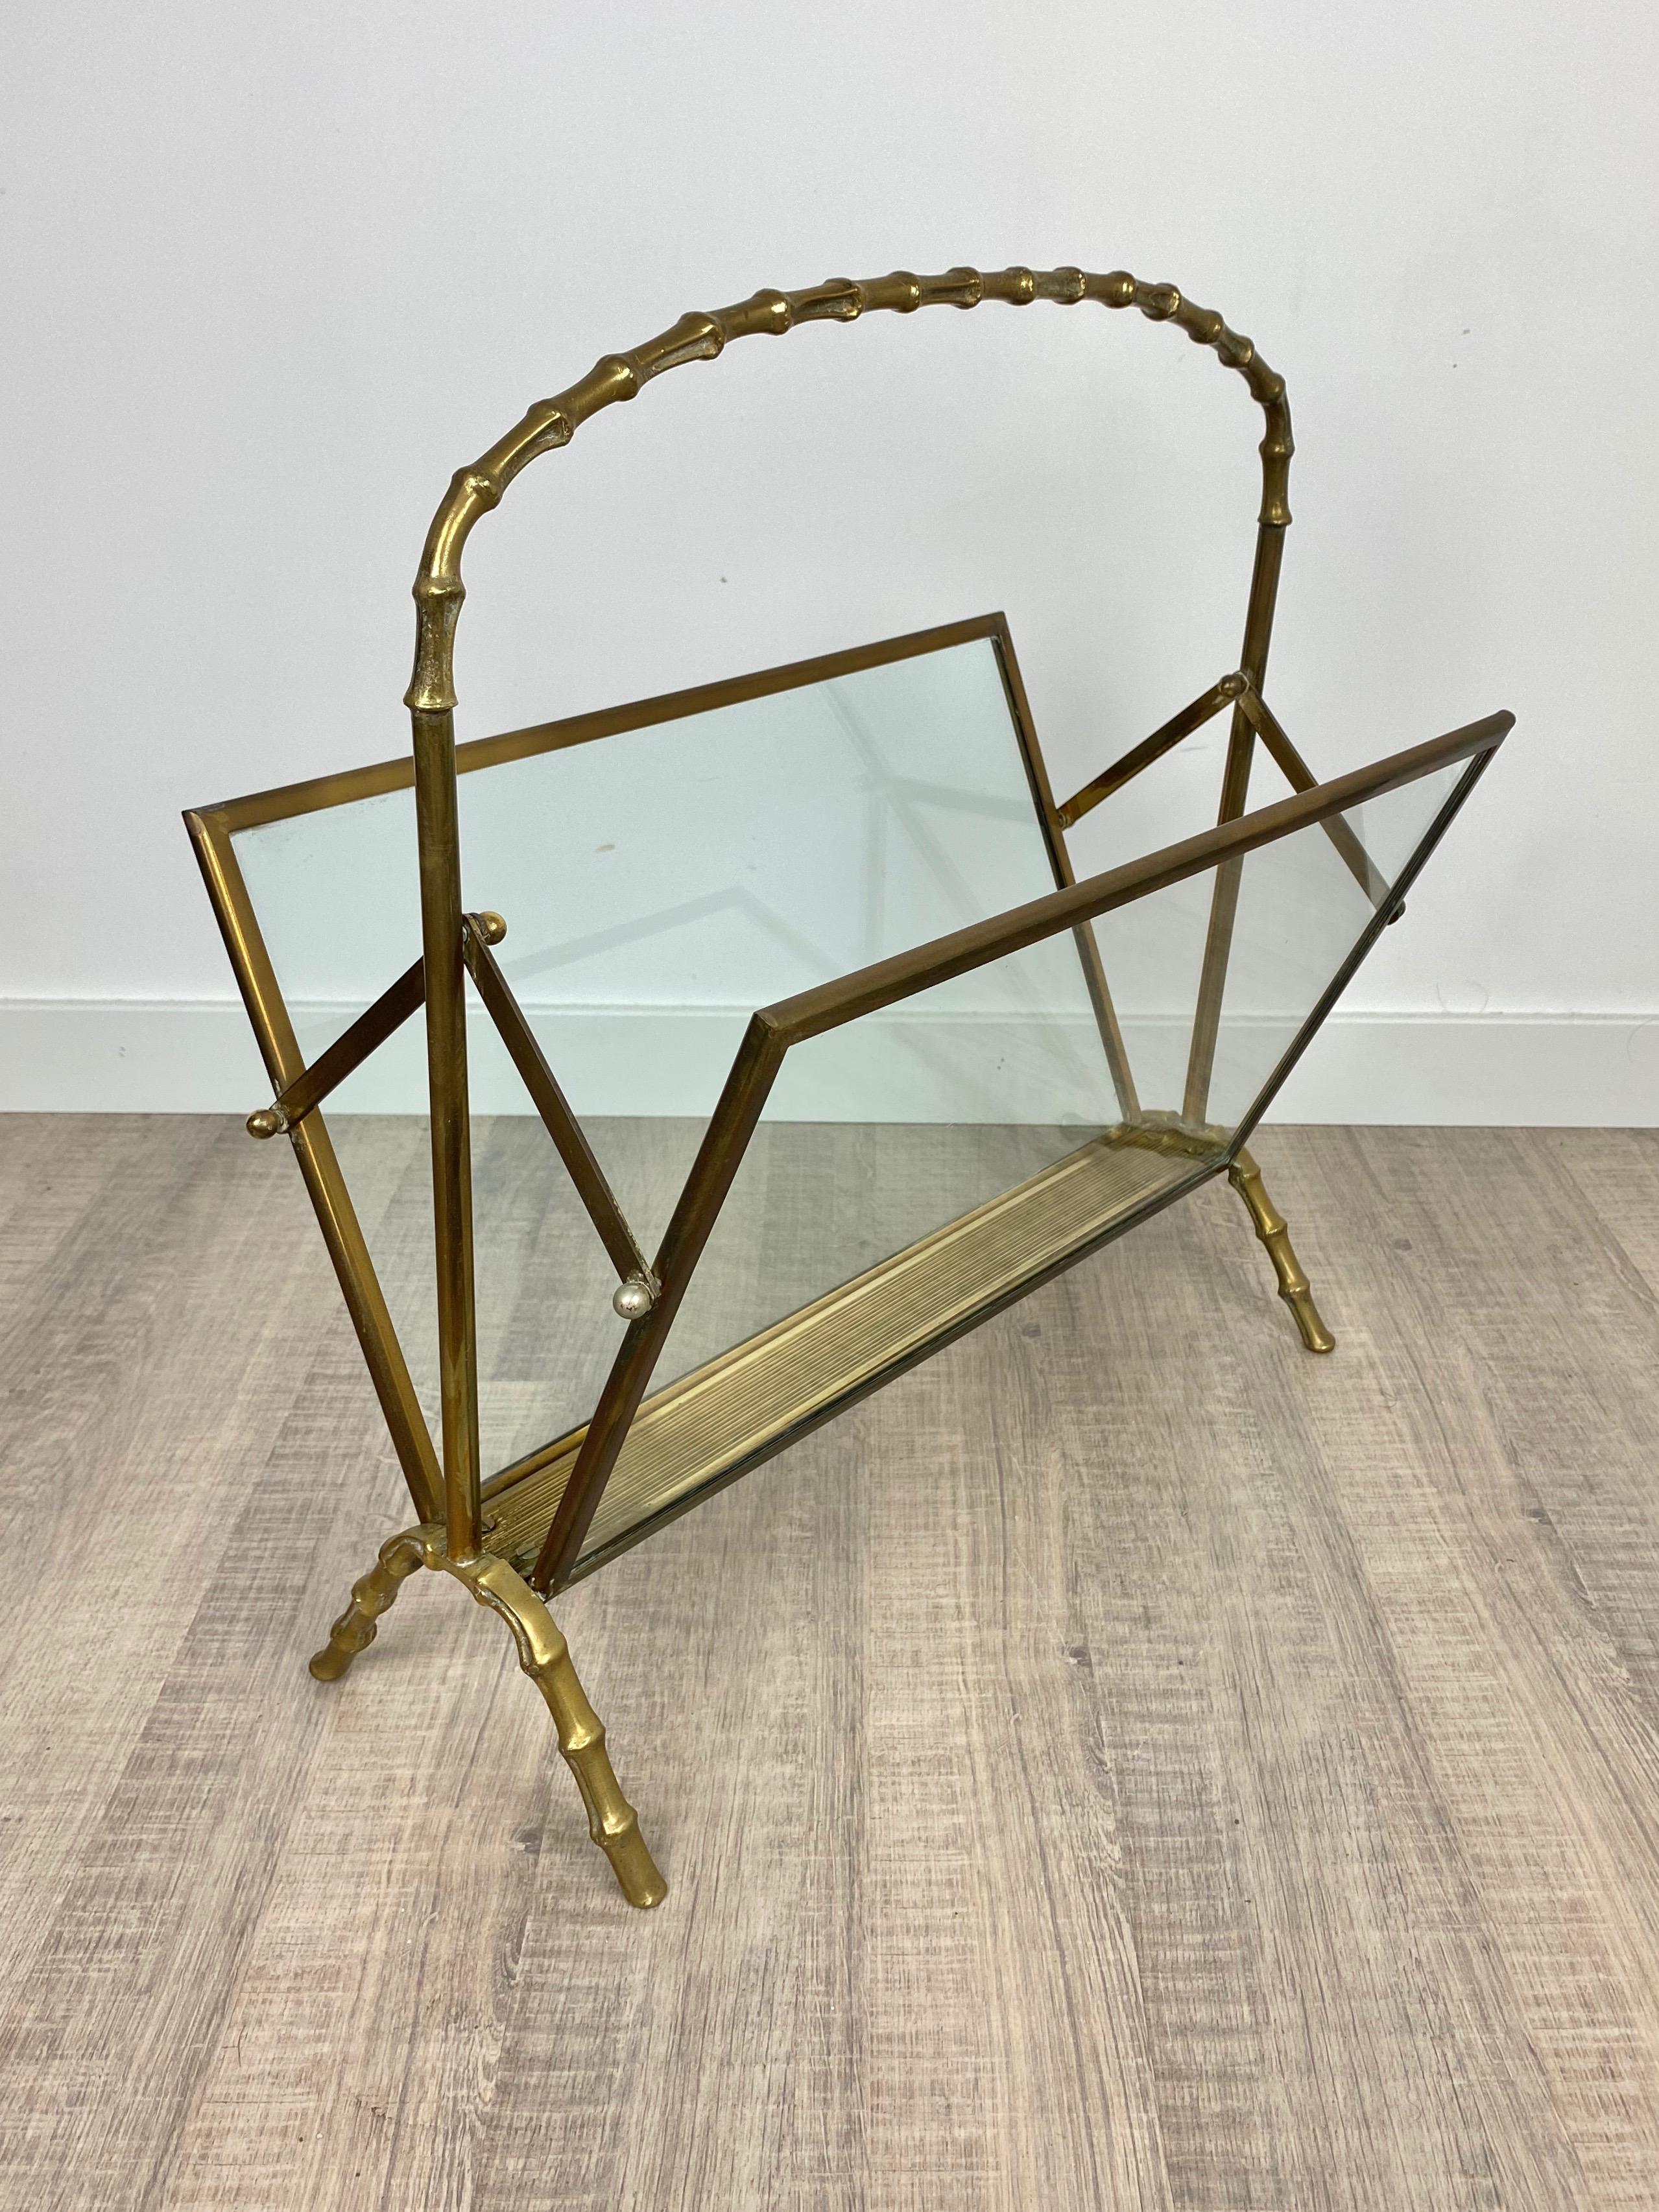 French Maison Baguès Magazine Rack Stand Faux Bamboo Brass Glass, France, 1950s For Sale